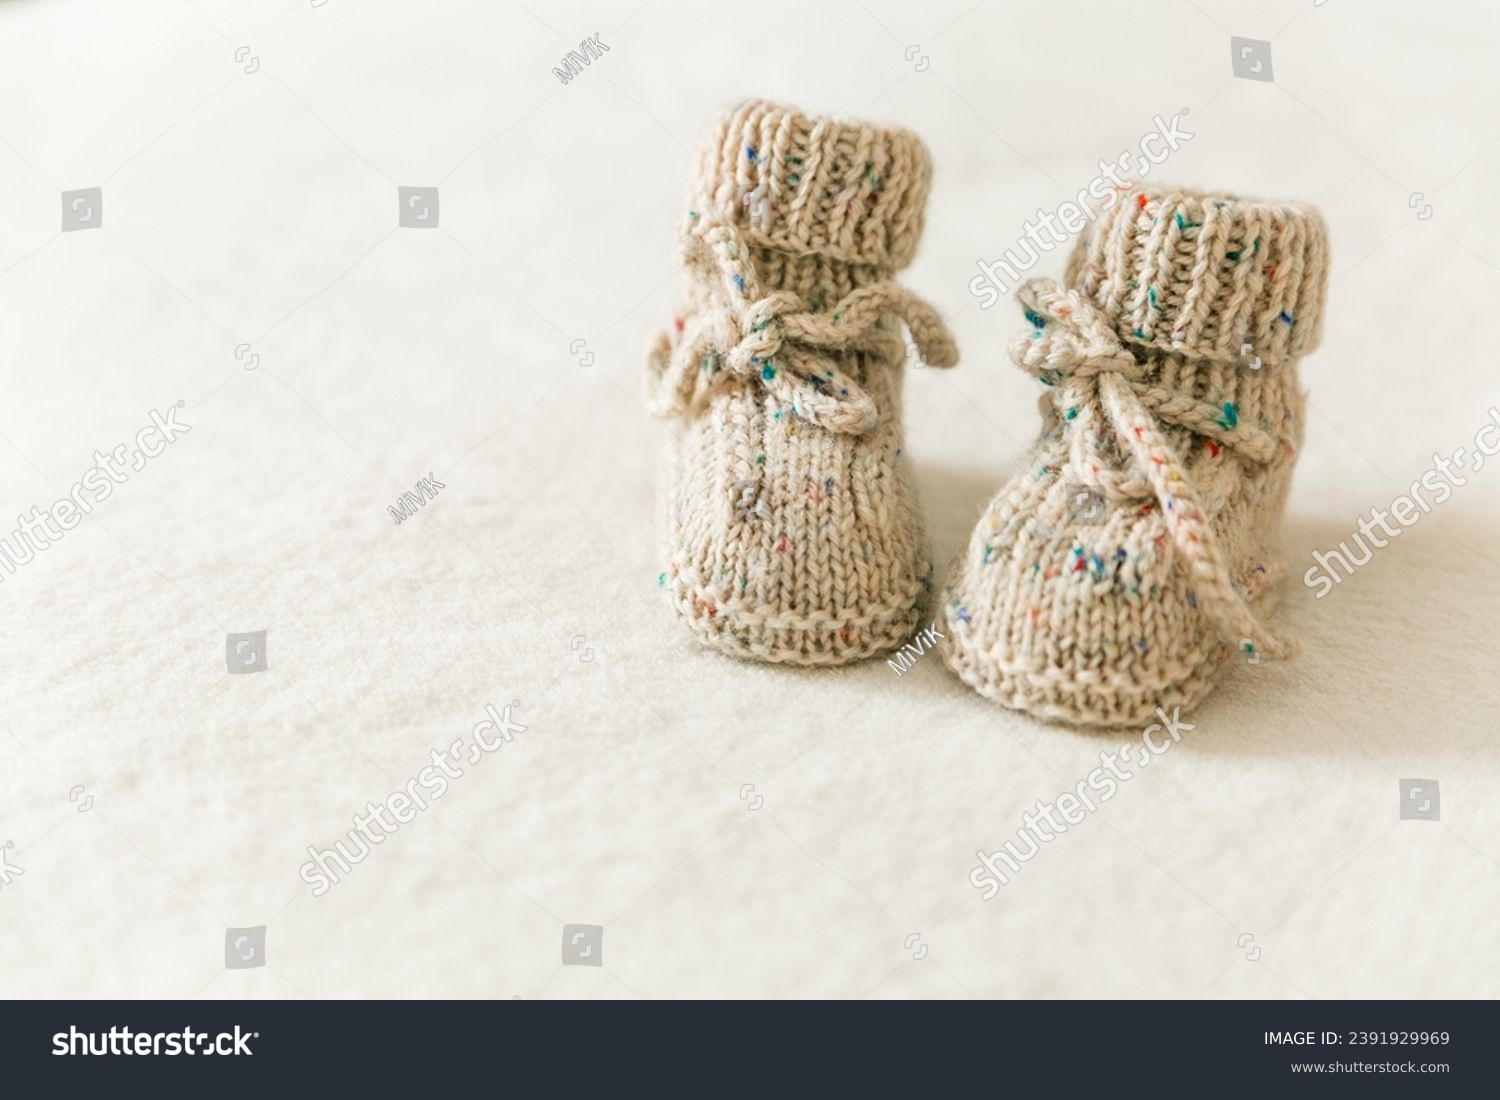 Knitted baby socks, booties on a white background with copy space. Pregnancy and motherhood concept, first birthday banner, handmade socks, baby warm clothes, handmade knitted socks, hobby. #2391929969